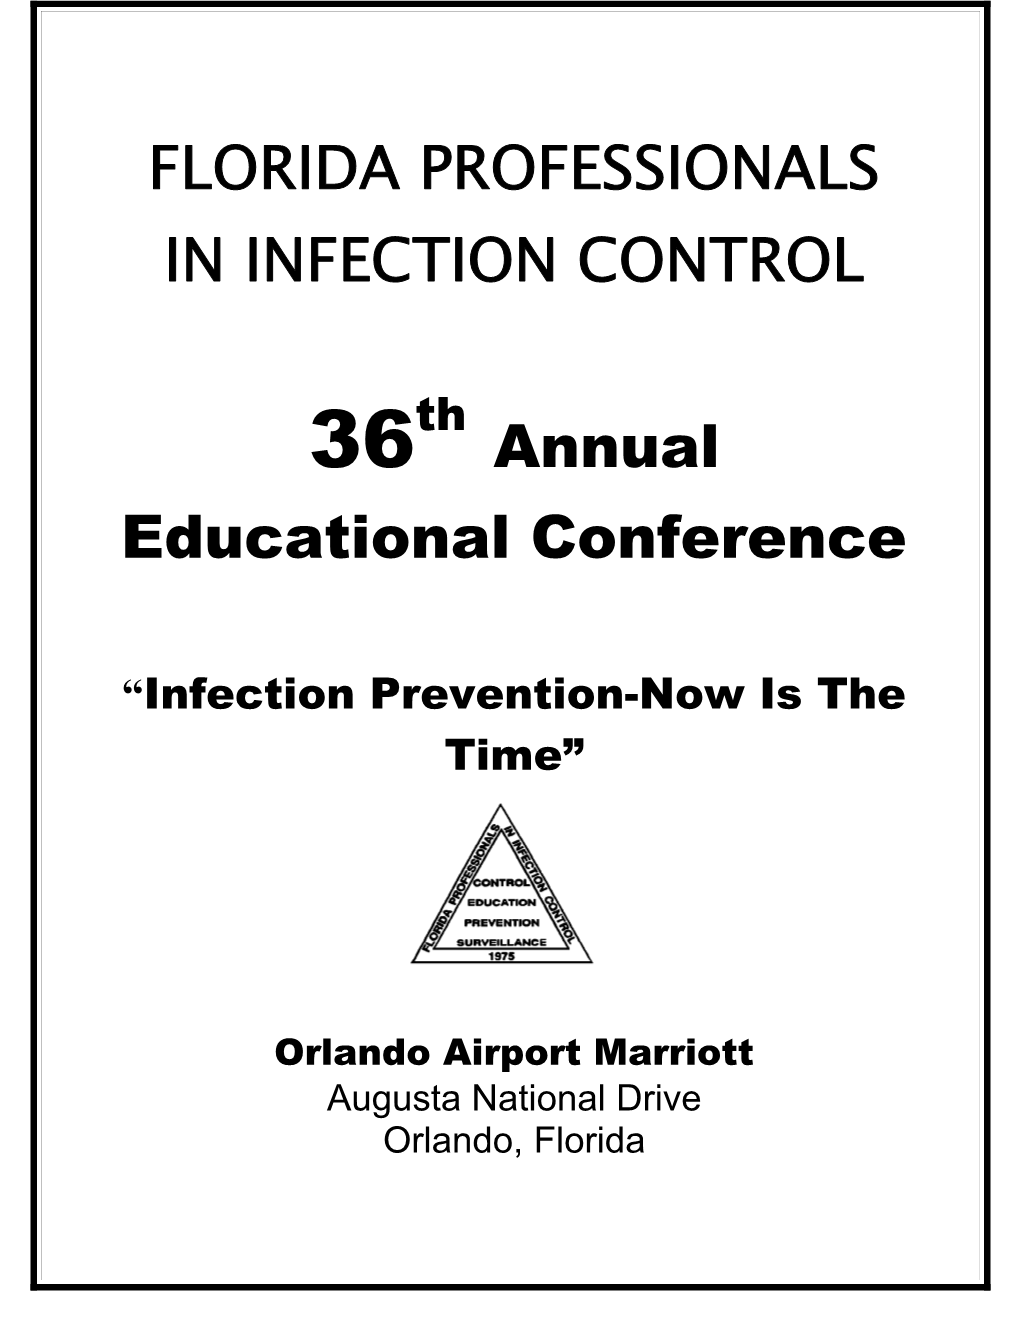 FPIC: 28Th ANNUAL CONFERENCE